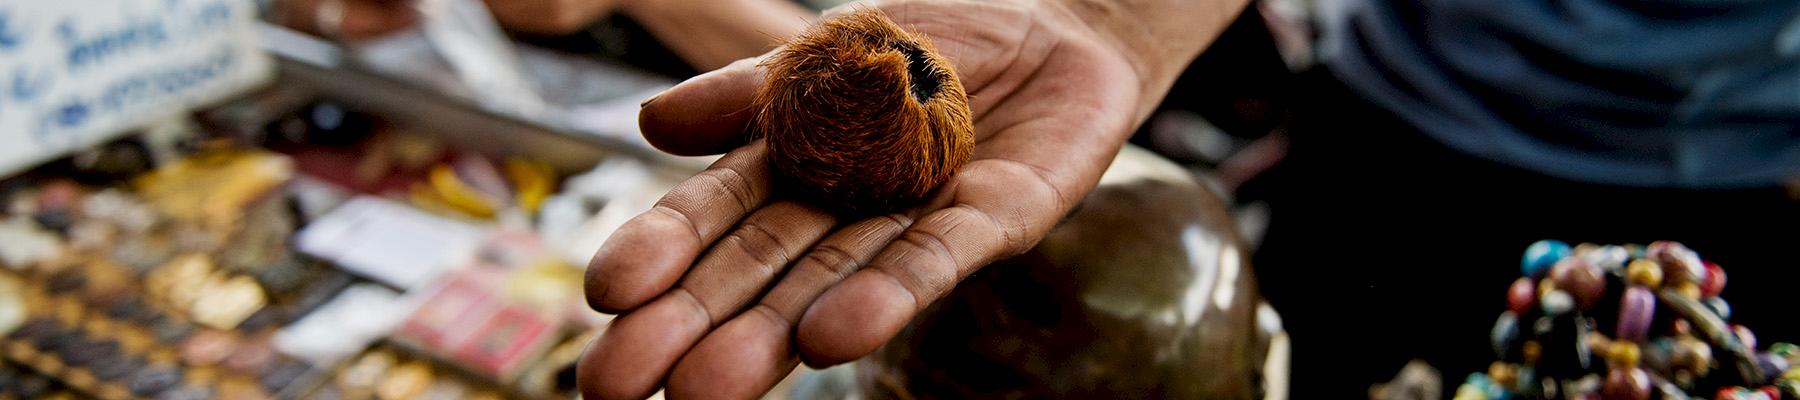 A tiger's testicle, of dubious authenticity, on sale at Tha Phra Chan market, Bangkok, Thailand © James Morgan / WWF